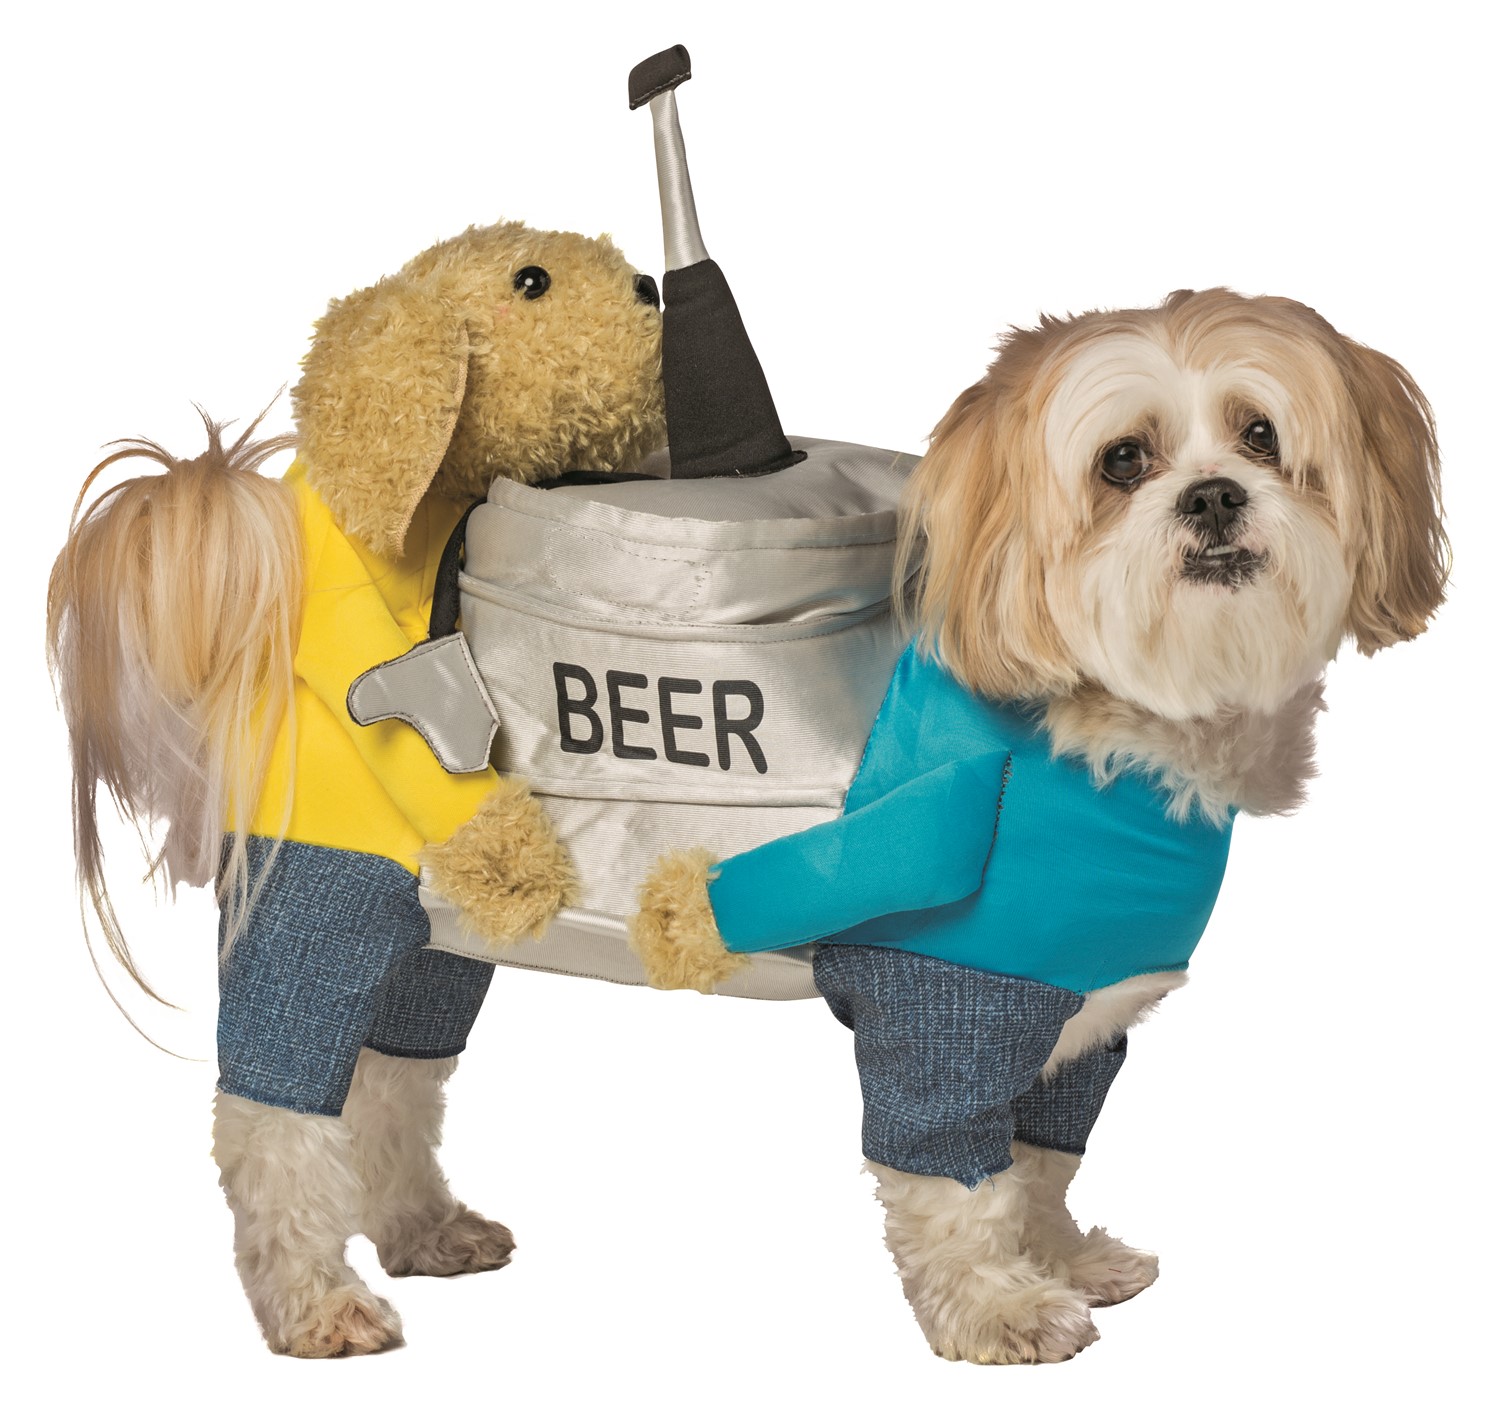 Rasta Imposta Carrying Beer Keg Dog Pet Costume, Available in Sizes X-Small to 2X-3X 5083